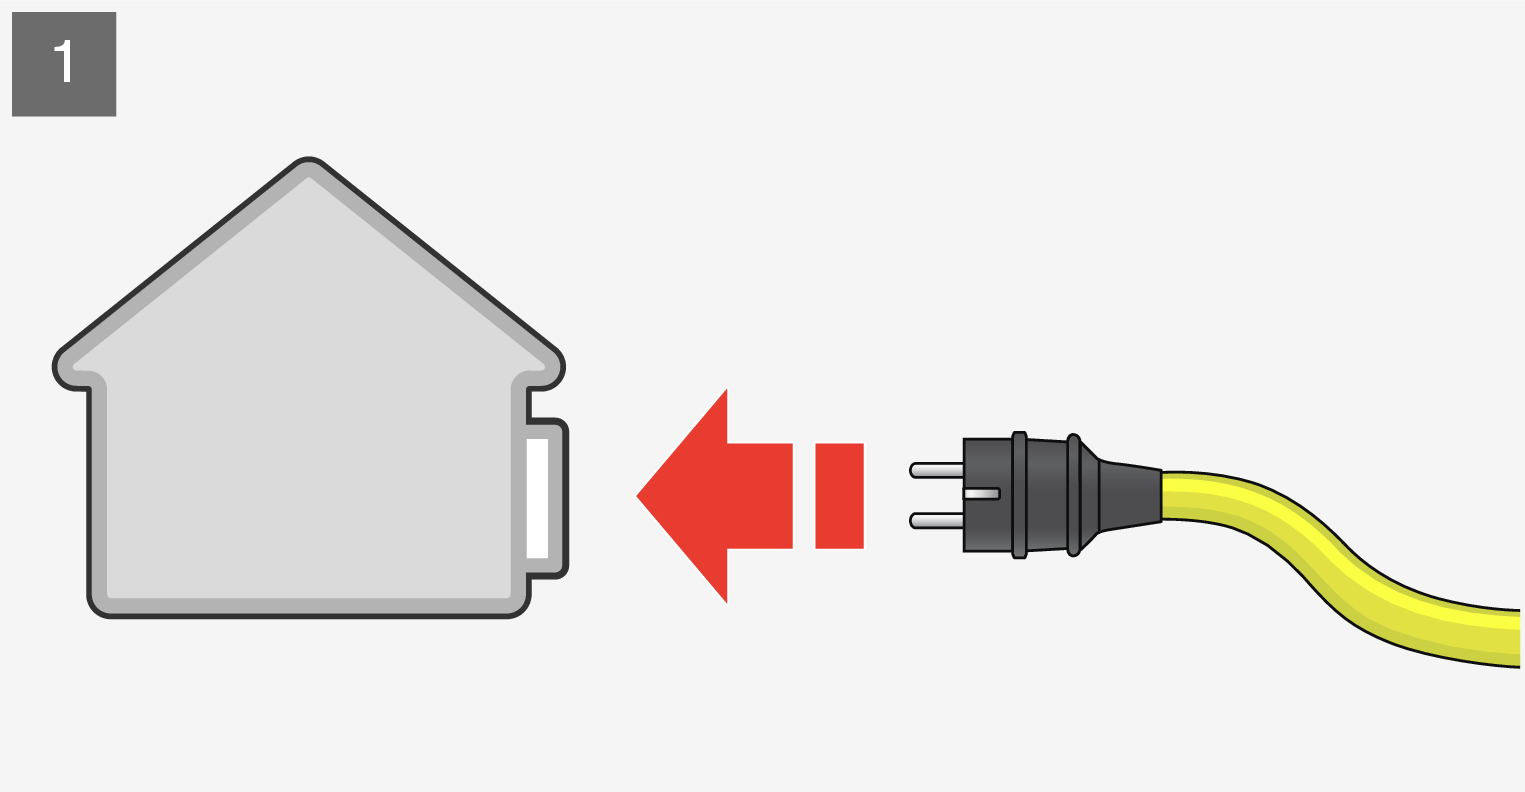 PS-1926-Hybrid-Plug in cable to house (Europe+China)